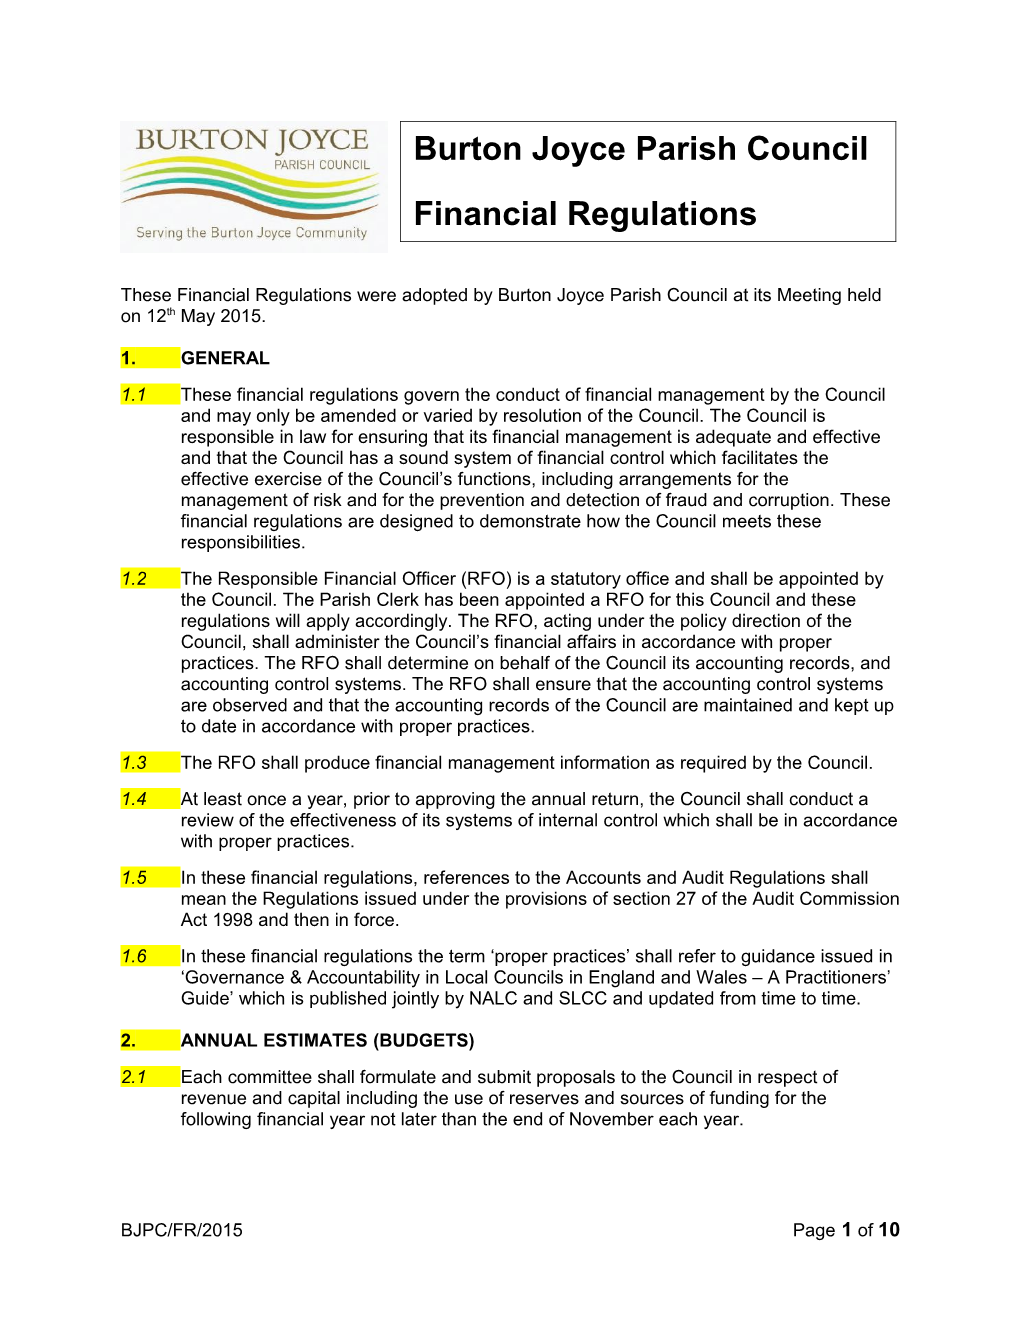 1.3The RFO Shall Produce Financial Management Information As Required by the Council